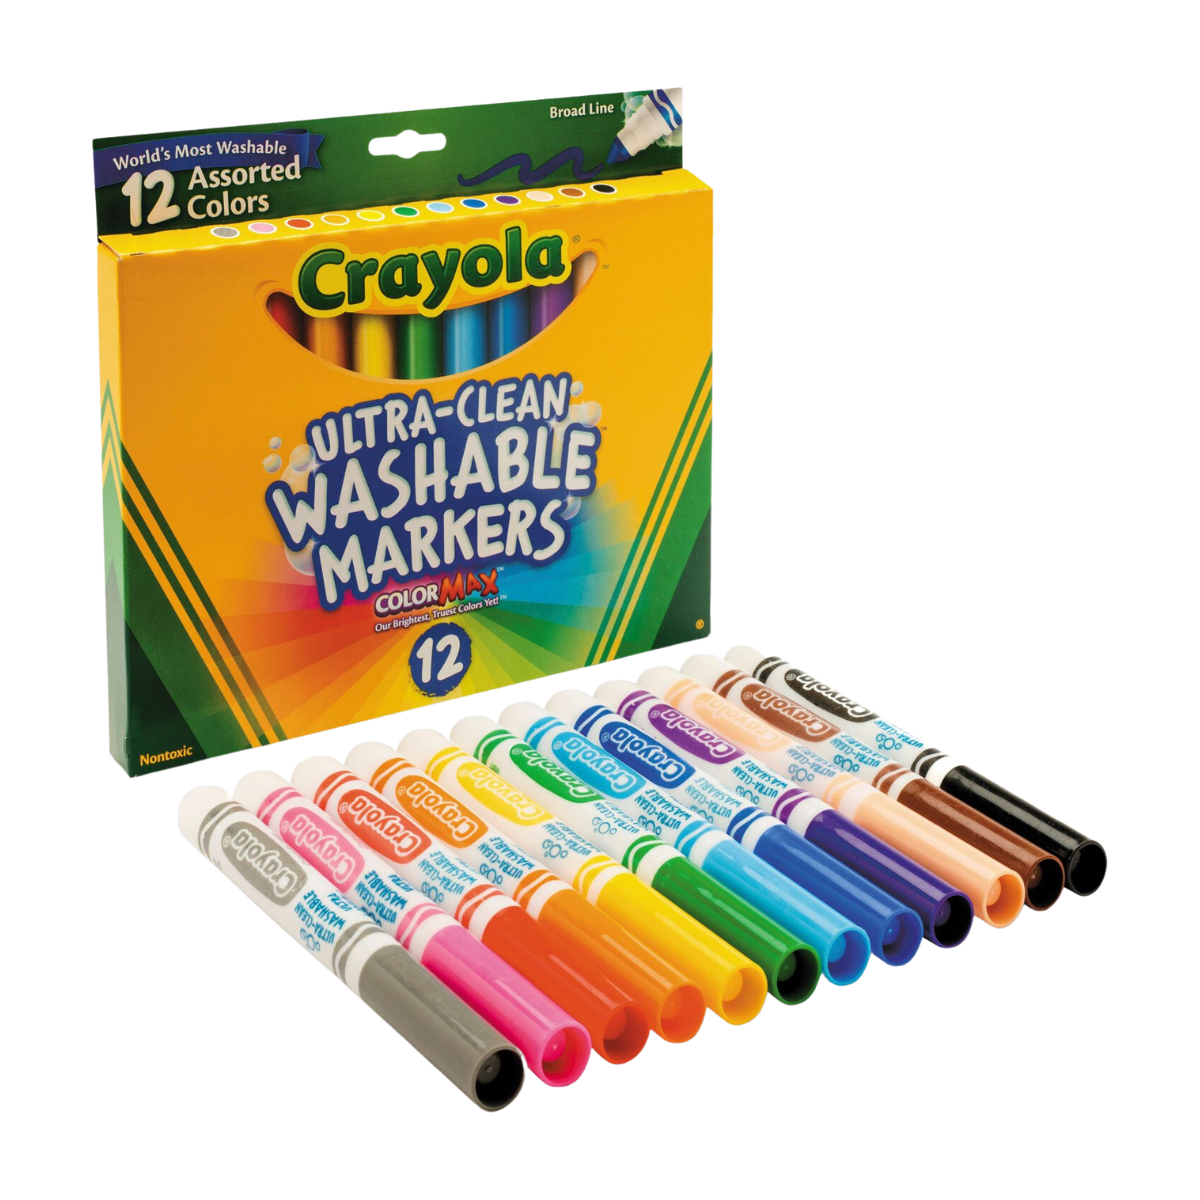 12 Ultra-Clean Washable Markers